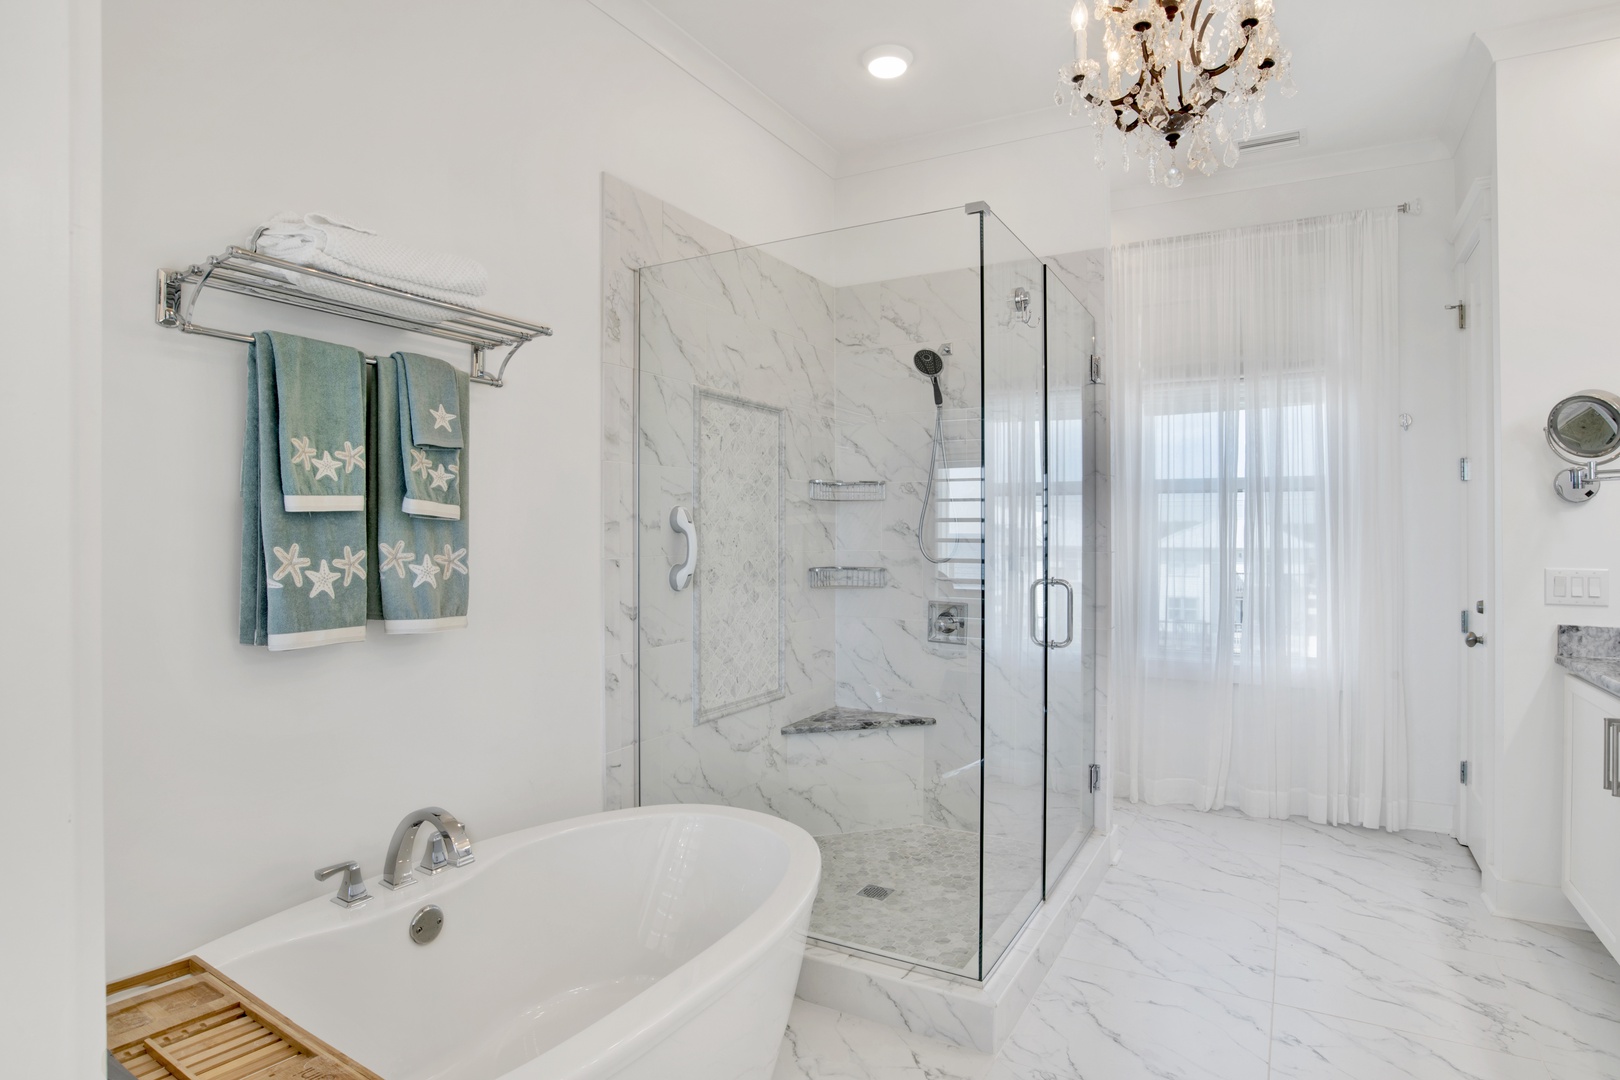 The master bath has a walk-in shower and a private water-closet